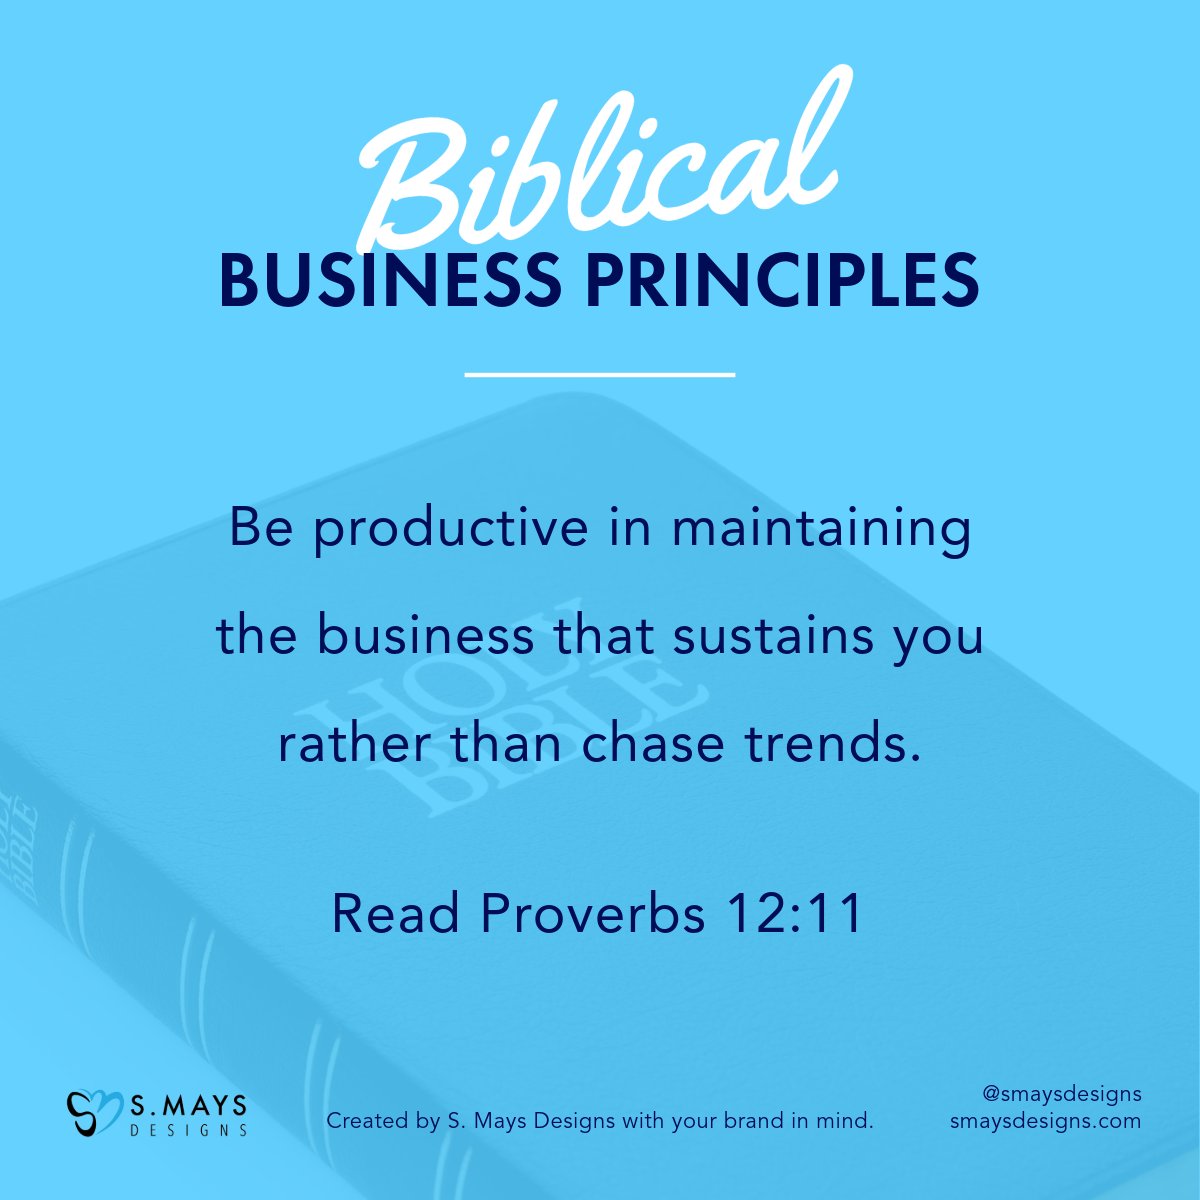 Be productive in maintaining the business that sustains you rather than chase trends. Read Proverbs 12:11

#smaysdesigns #biblicalbusinessprinciples #faithandbusiness #faithpreneur #kingdompreneur #kingdombusiness